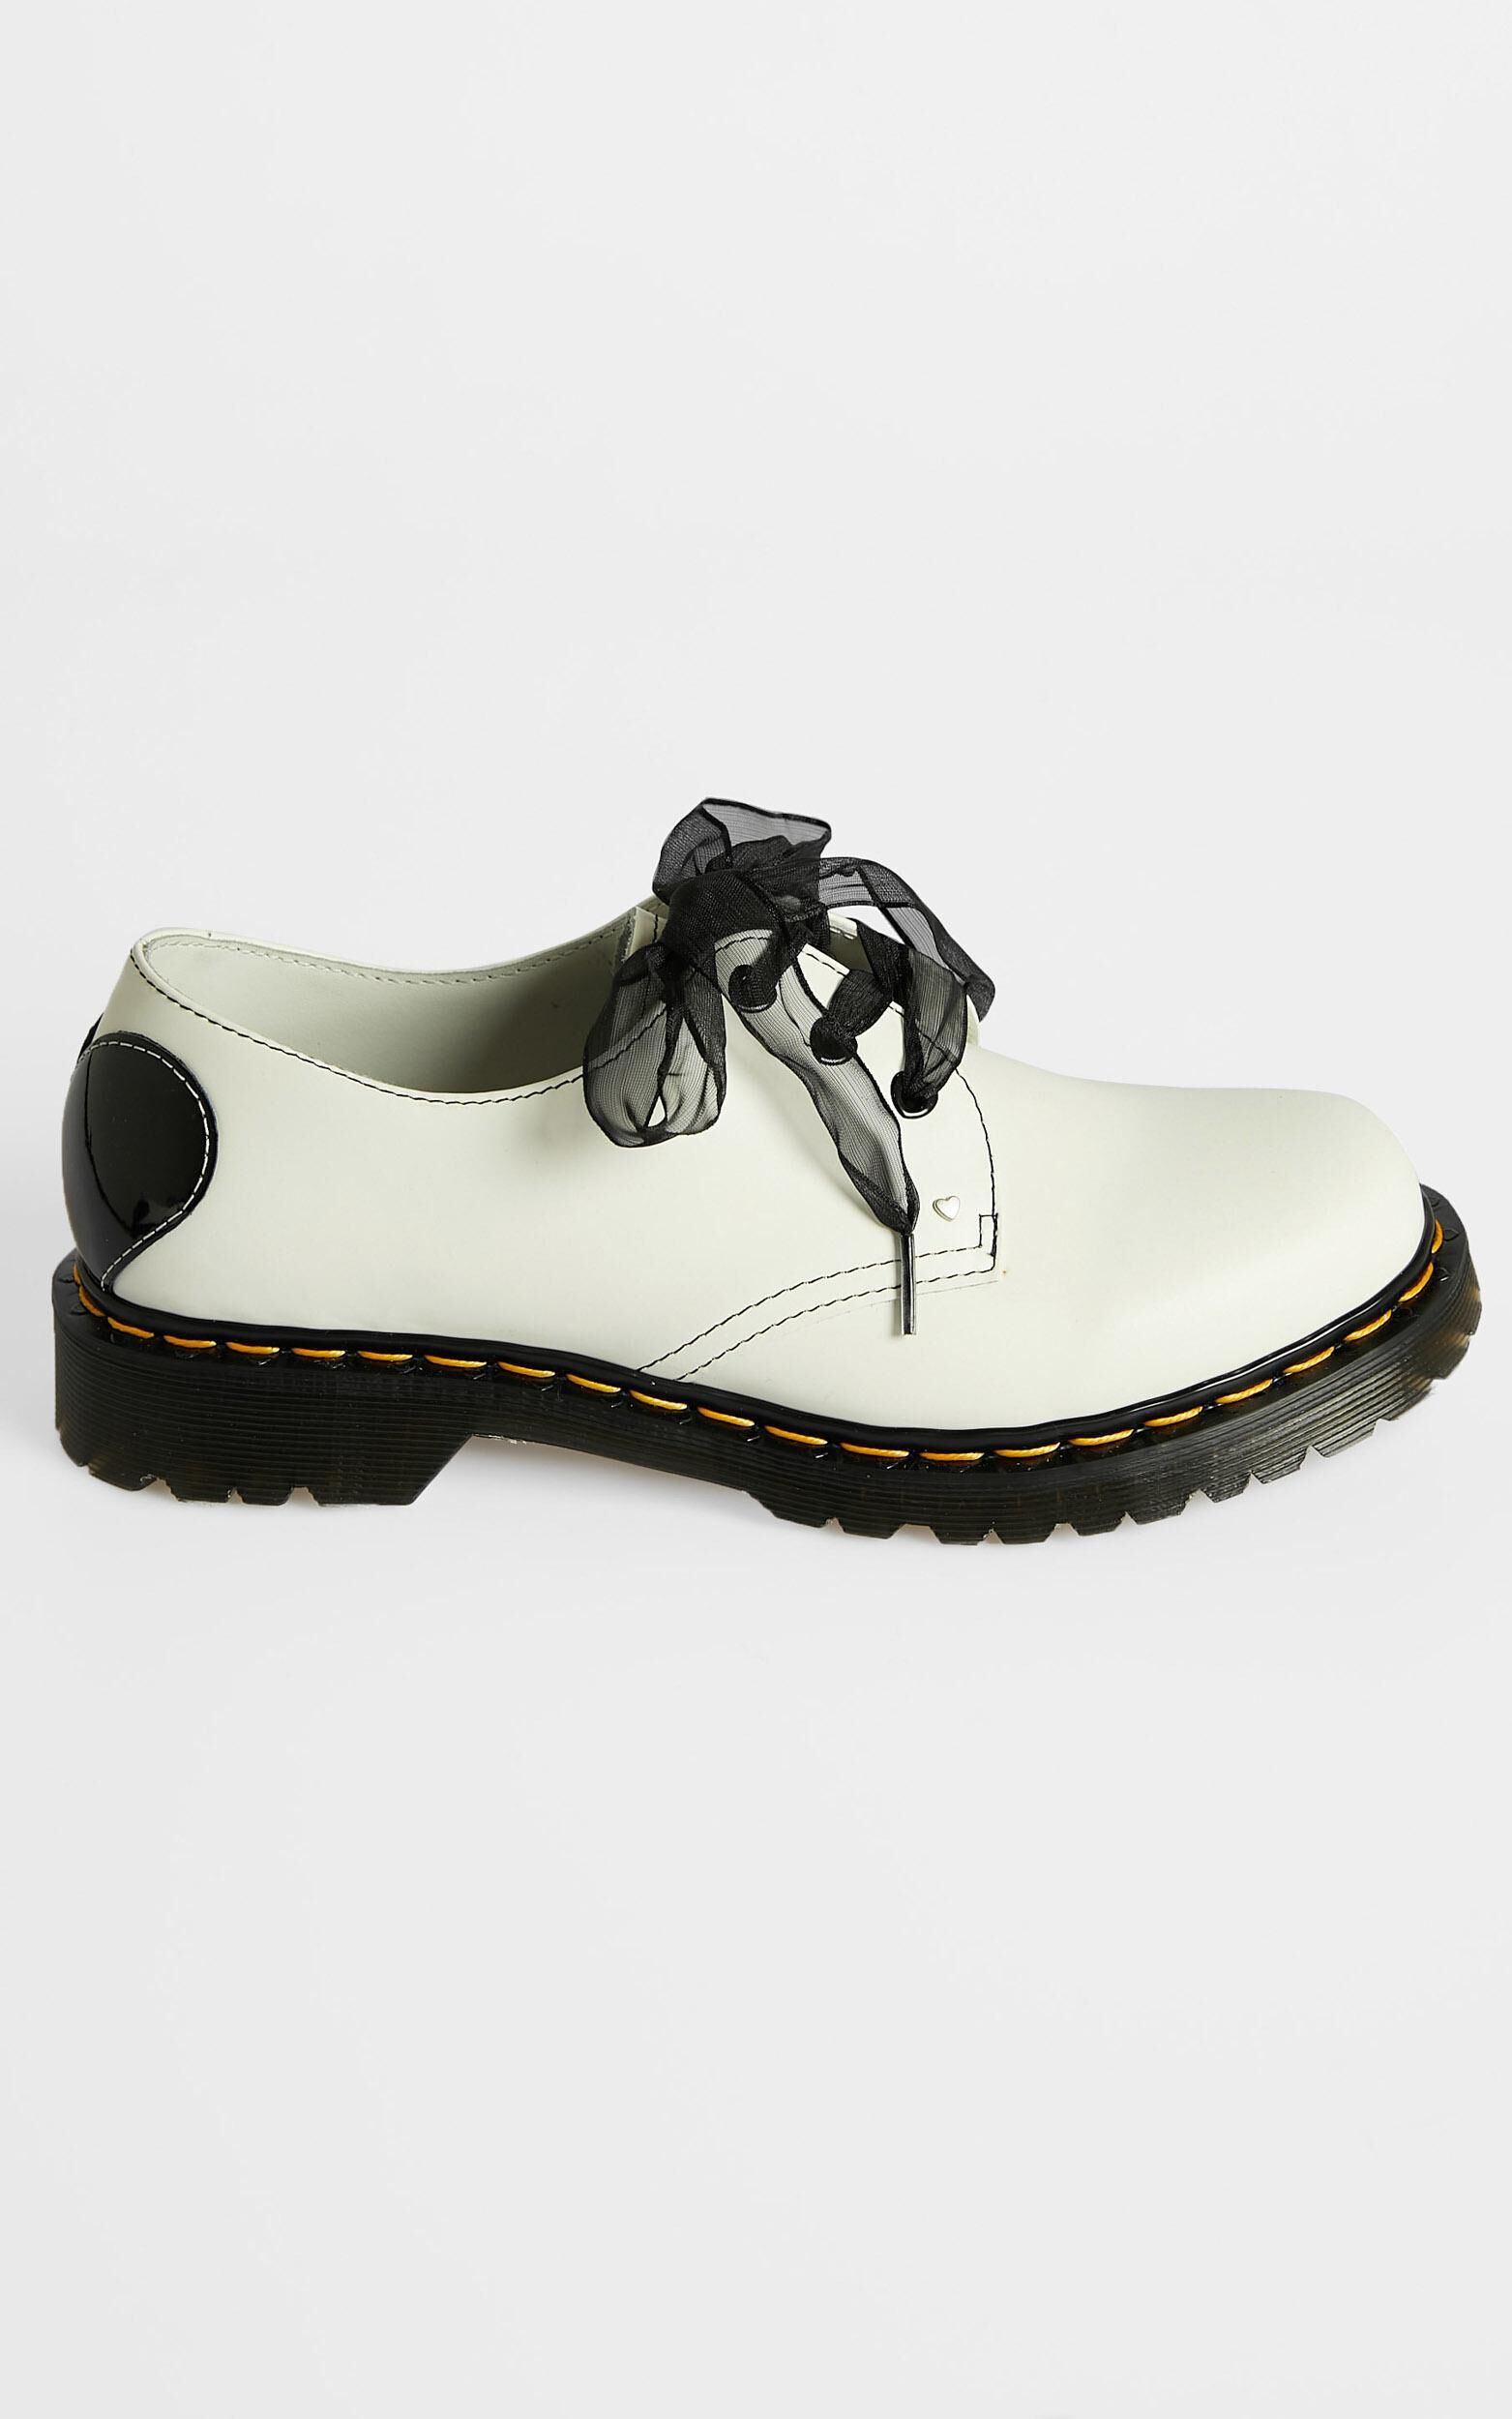 Dr. Martens - 1461 Hearts 3 Eye Shoe in White Smooth & Black Patent Lamper